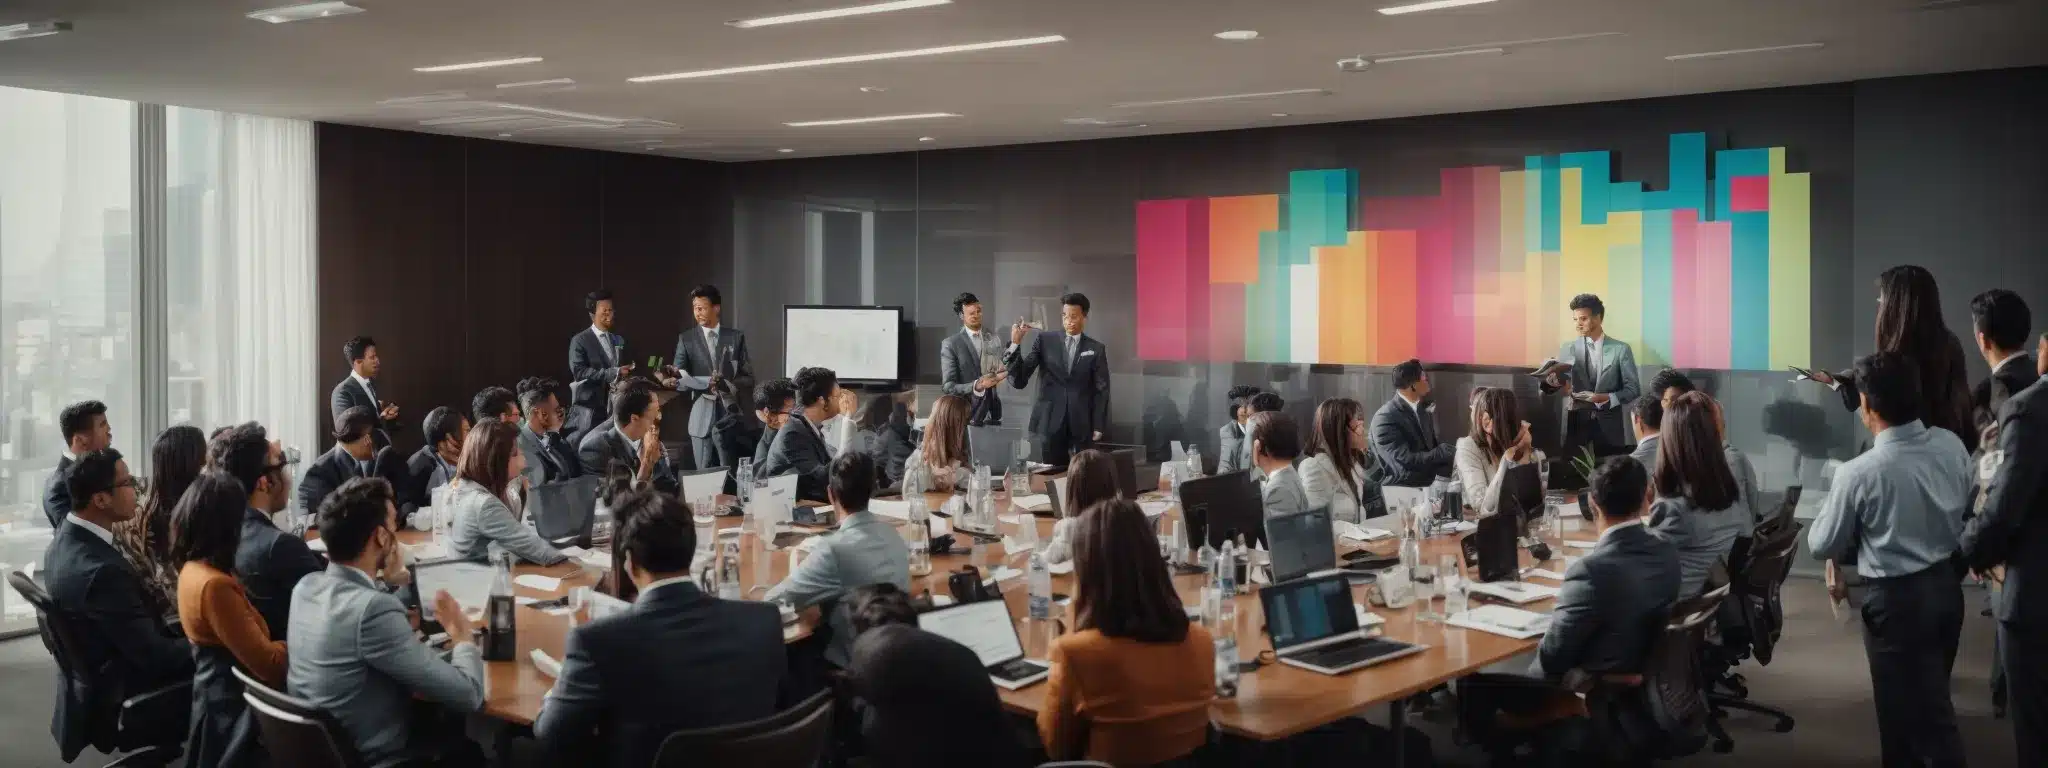 A Bustling Conference Room With Marketing Professionals Enthusiastically Discussing Over A Colorful Presentation With Charts And Graphics.